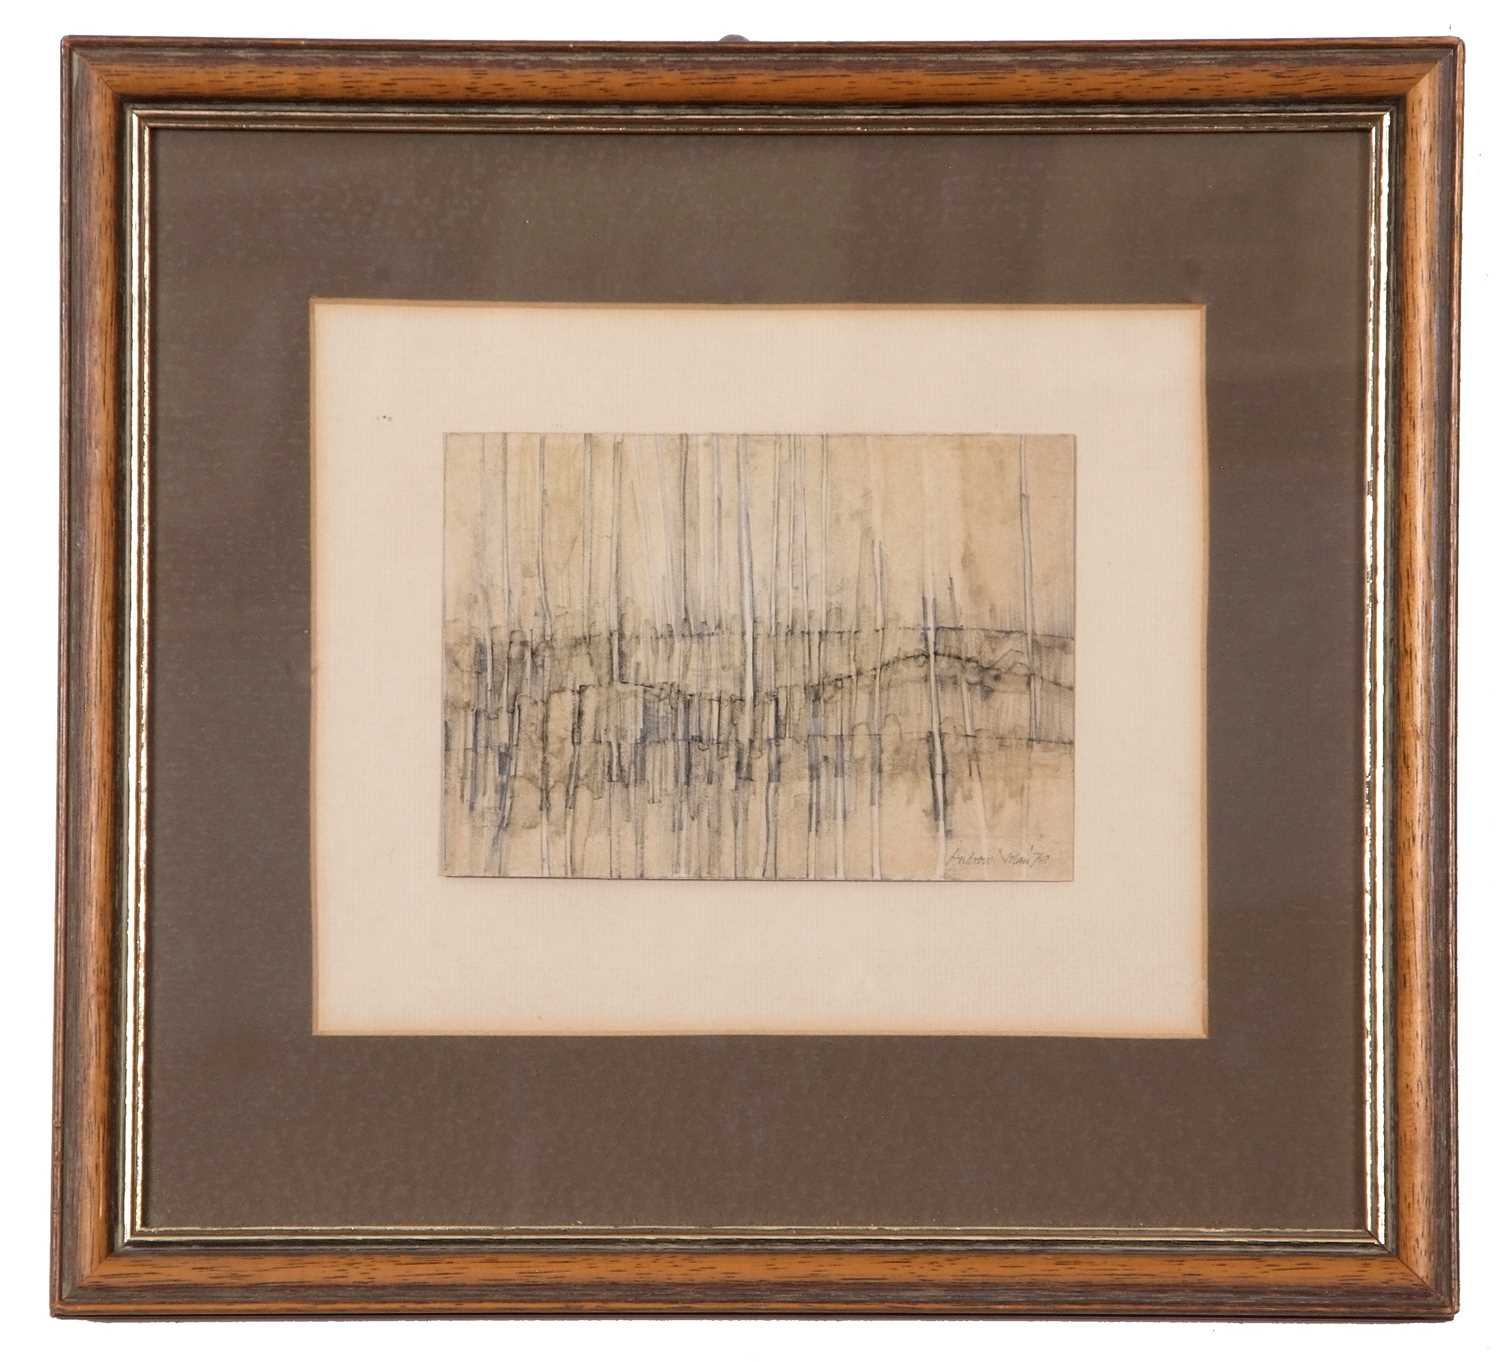 Andrew Nolan (British, 20th century), Abstract compostion, mixed media on card, signed and dated '